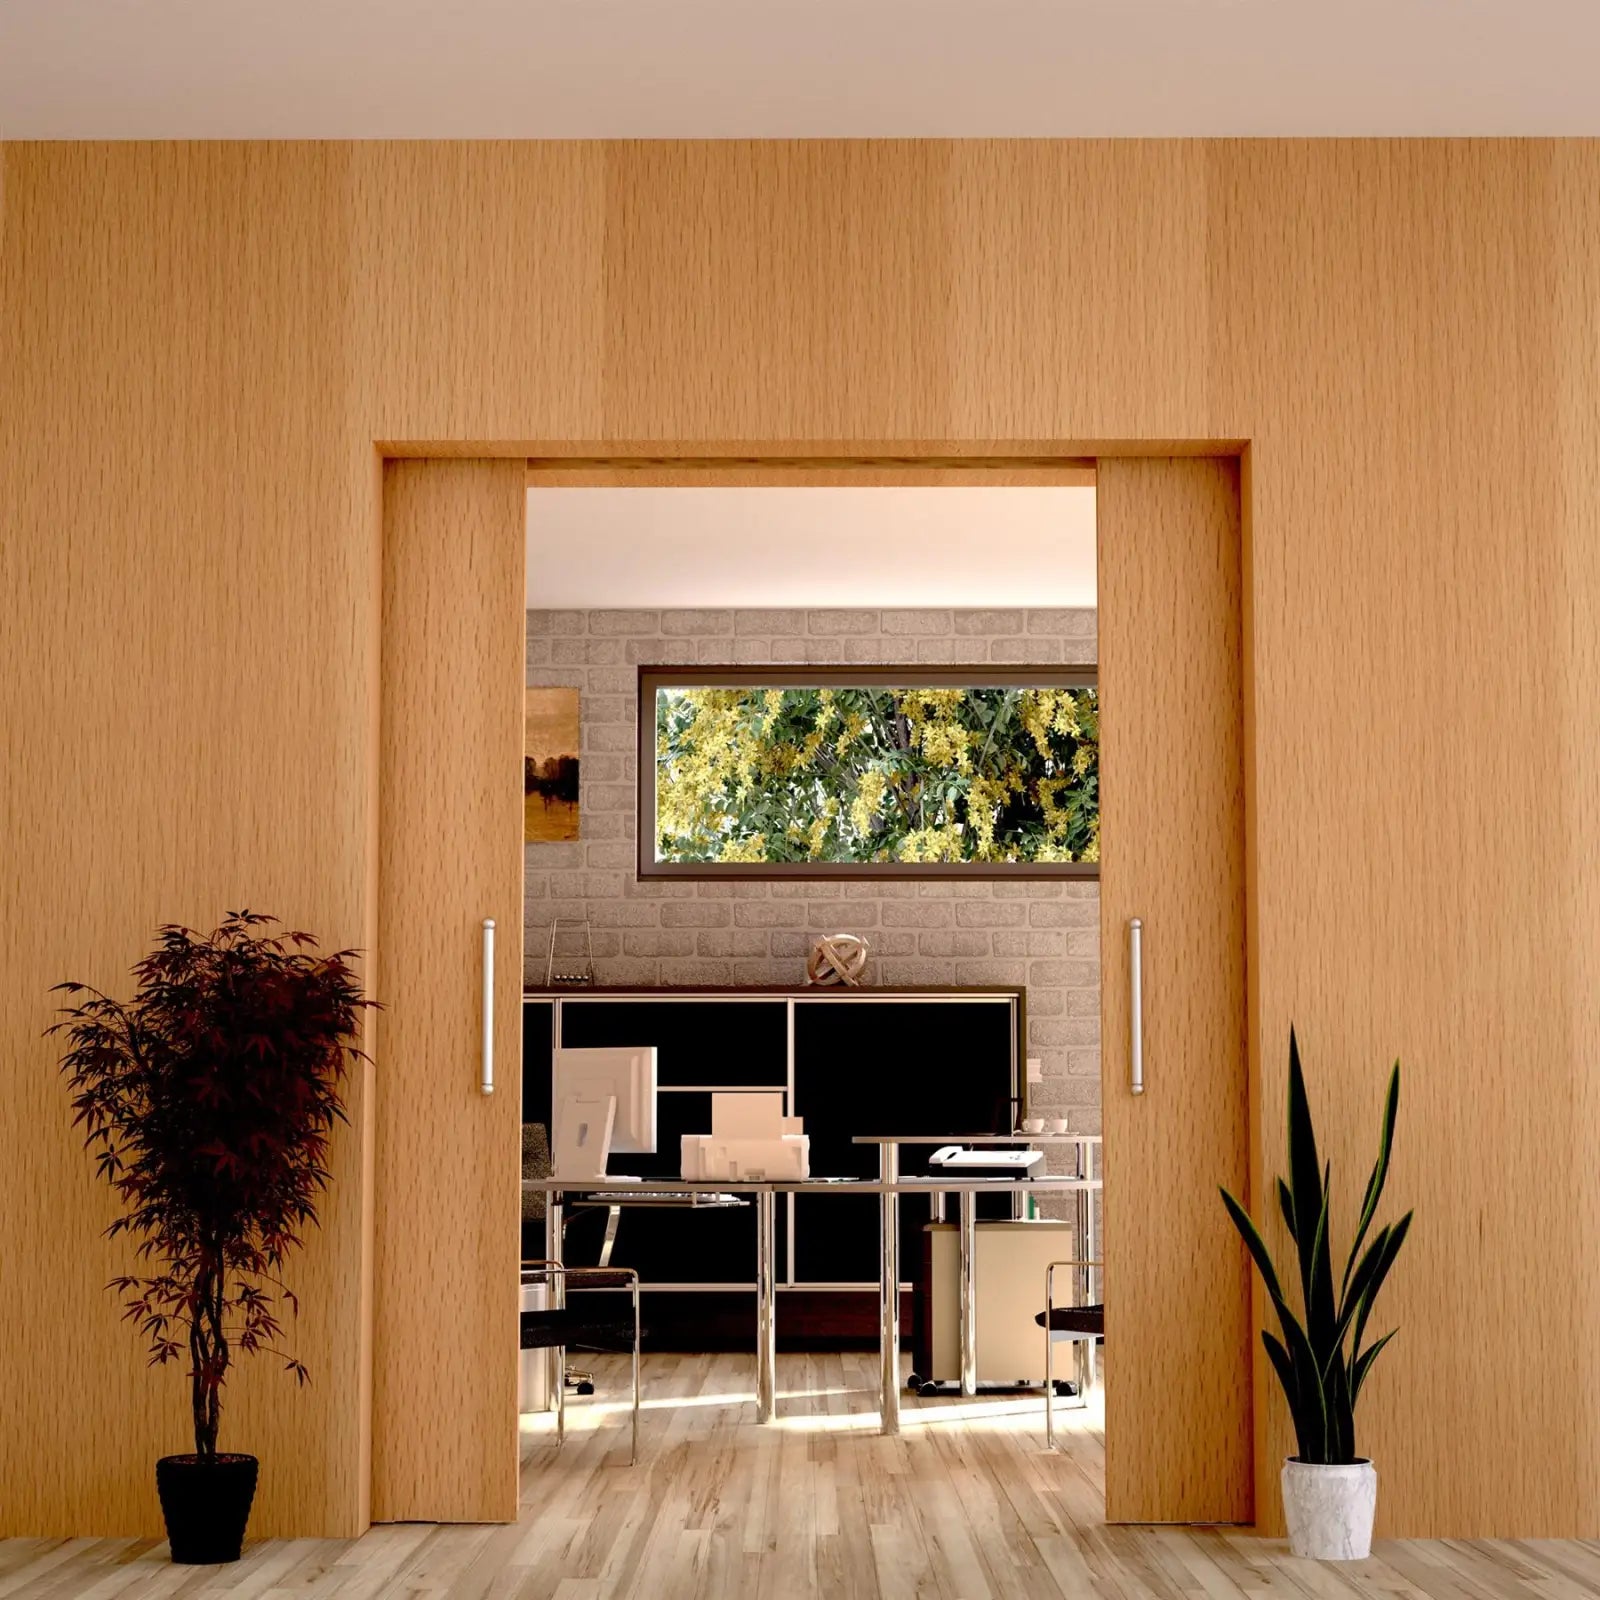 DS-Slide Double Synchro Sliding Door Kit - 4800mm Track - One Way Soft Close - Decor And Decor